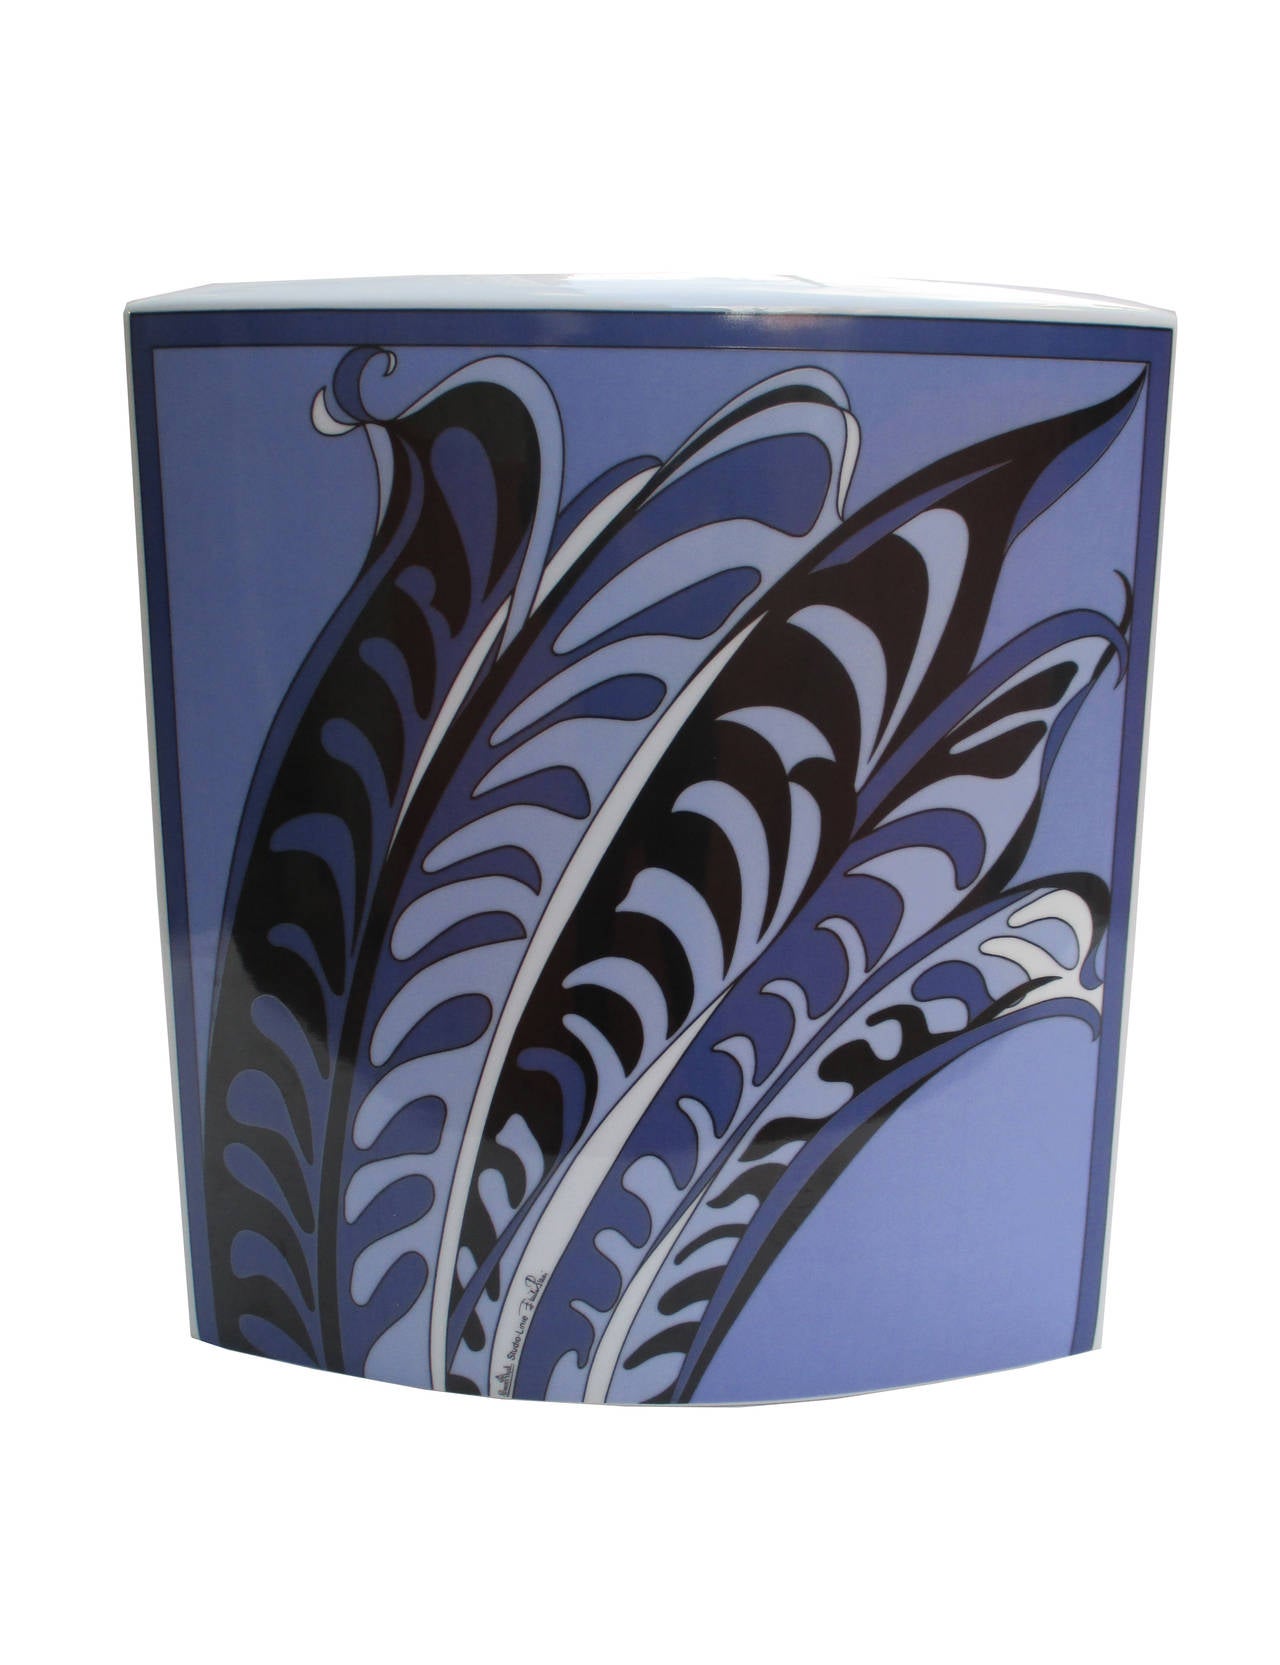 A large ceramic vase designed by Emilio Pucci for Rosenthal.
Porcelain, white, glazed, polychromatic overglaze. 
Marked with signature and makers mark.